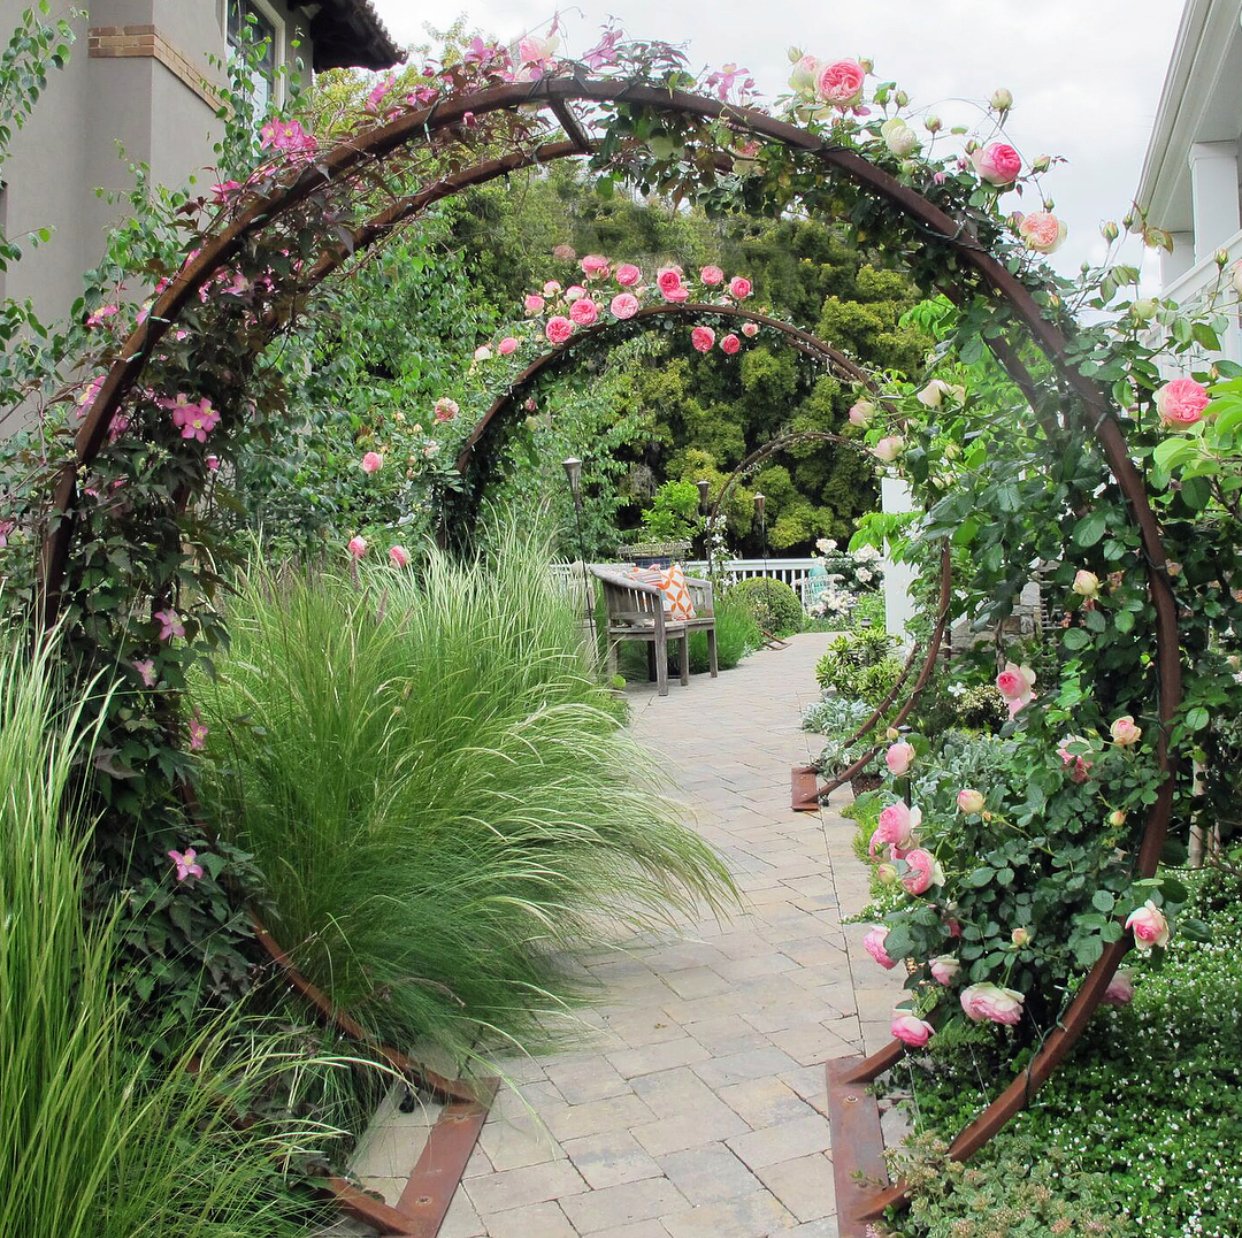 Gracie_modern_arbor_walkway_roses_arches Garden trellis ideas that are inexpensive and look great